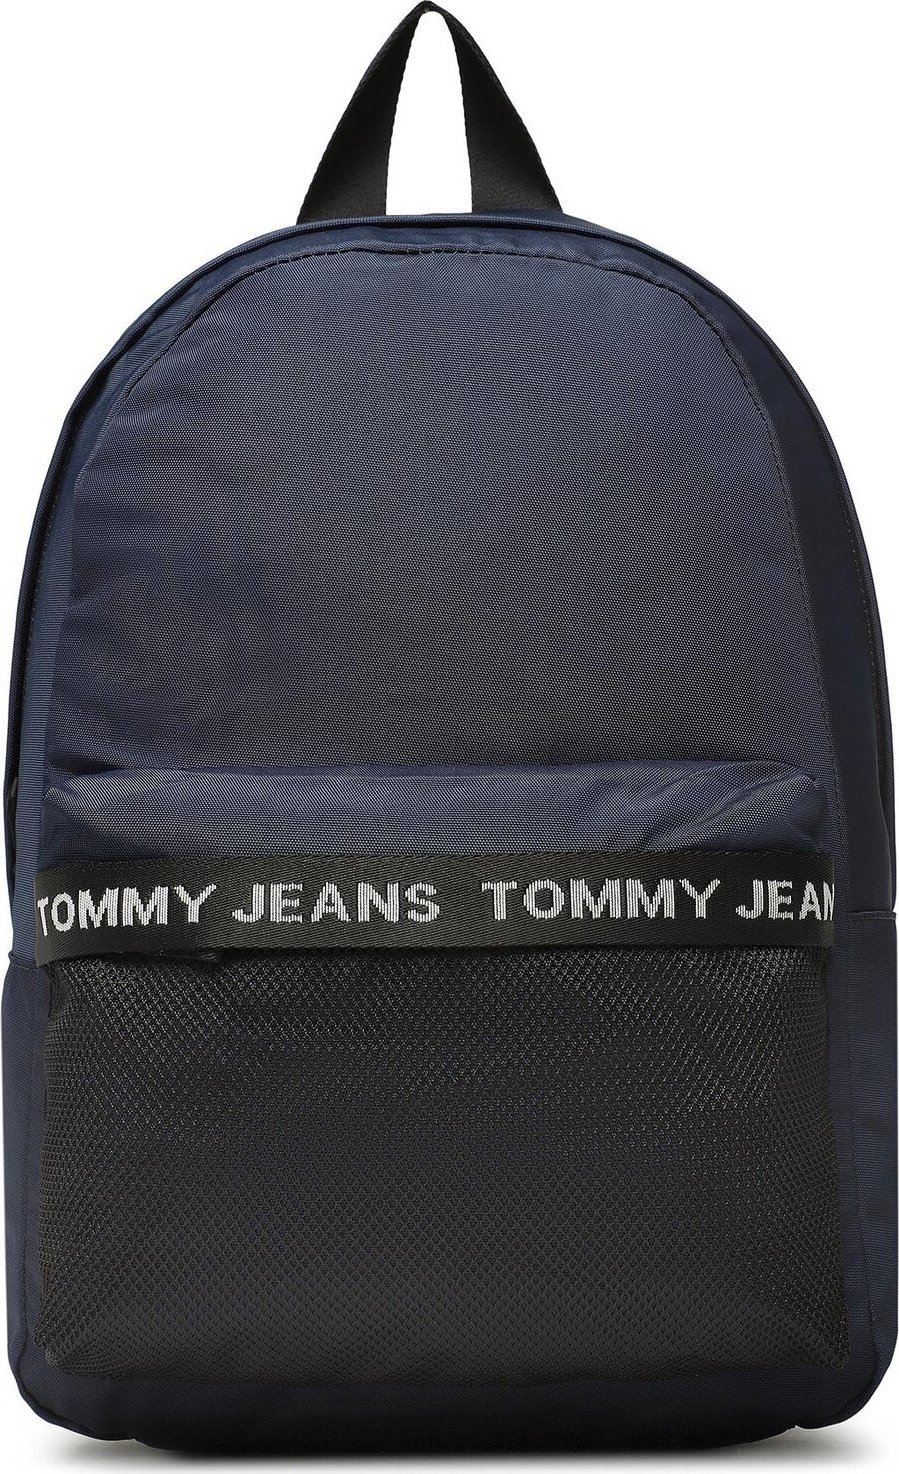 Batoh Tommy Jeans Tjm Essential Backpack AM0AM10900 C87